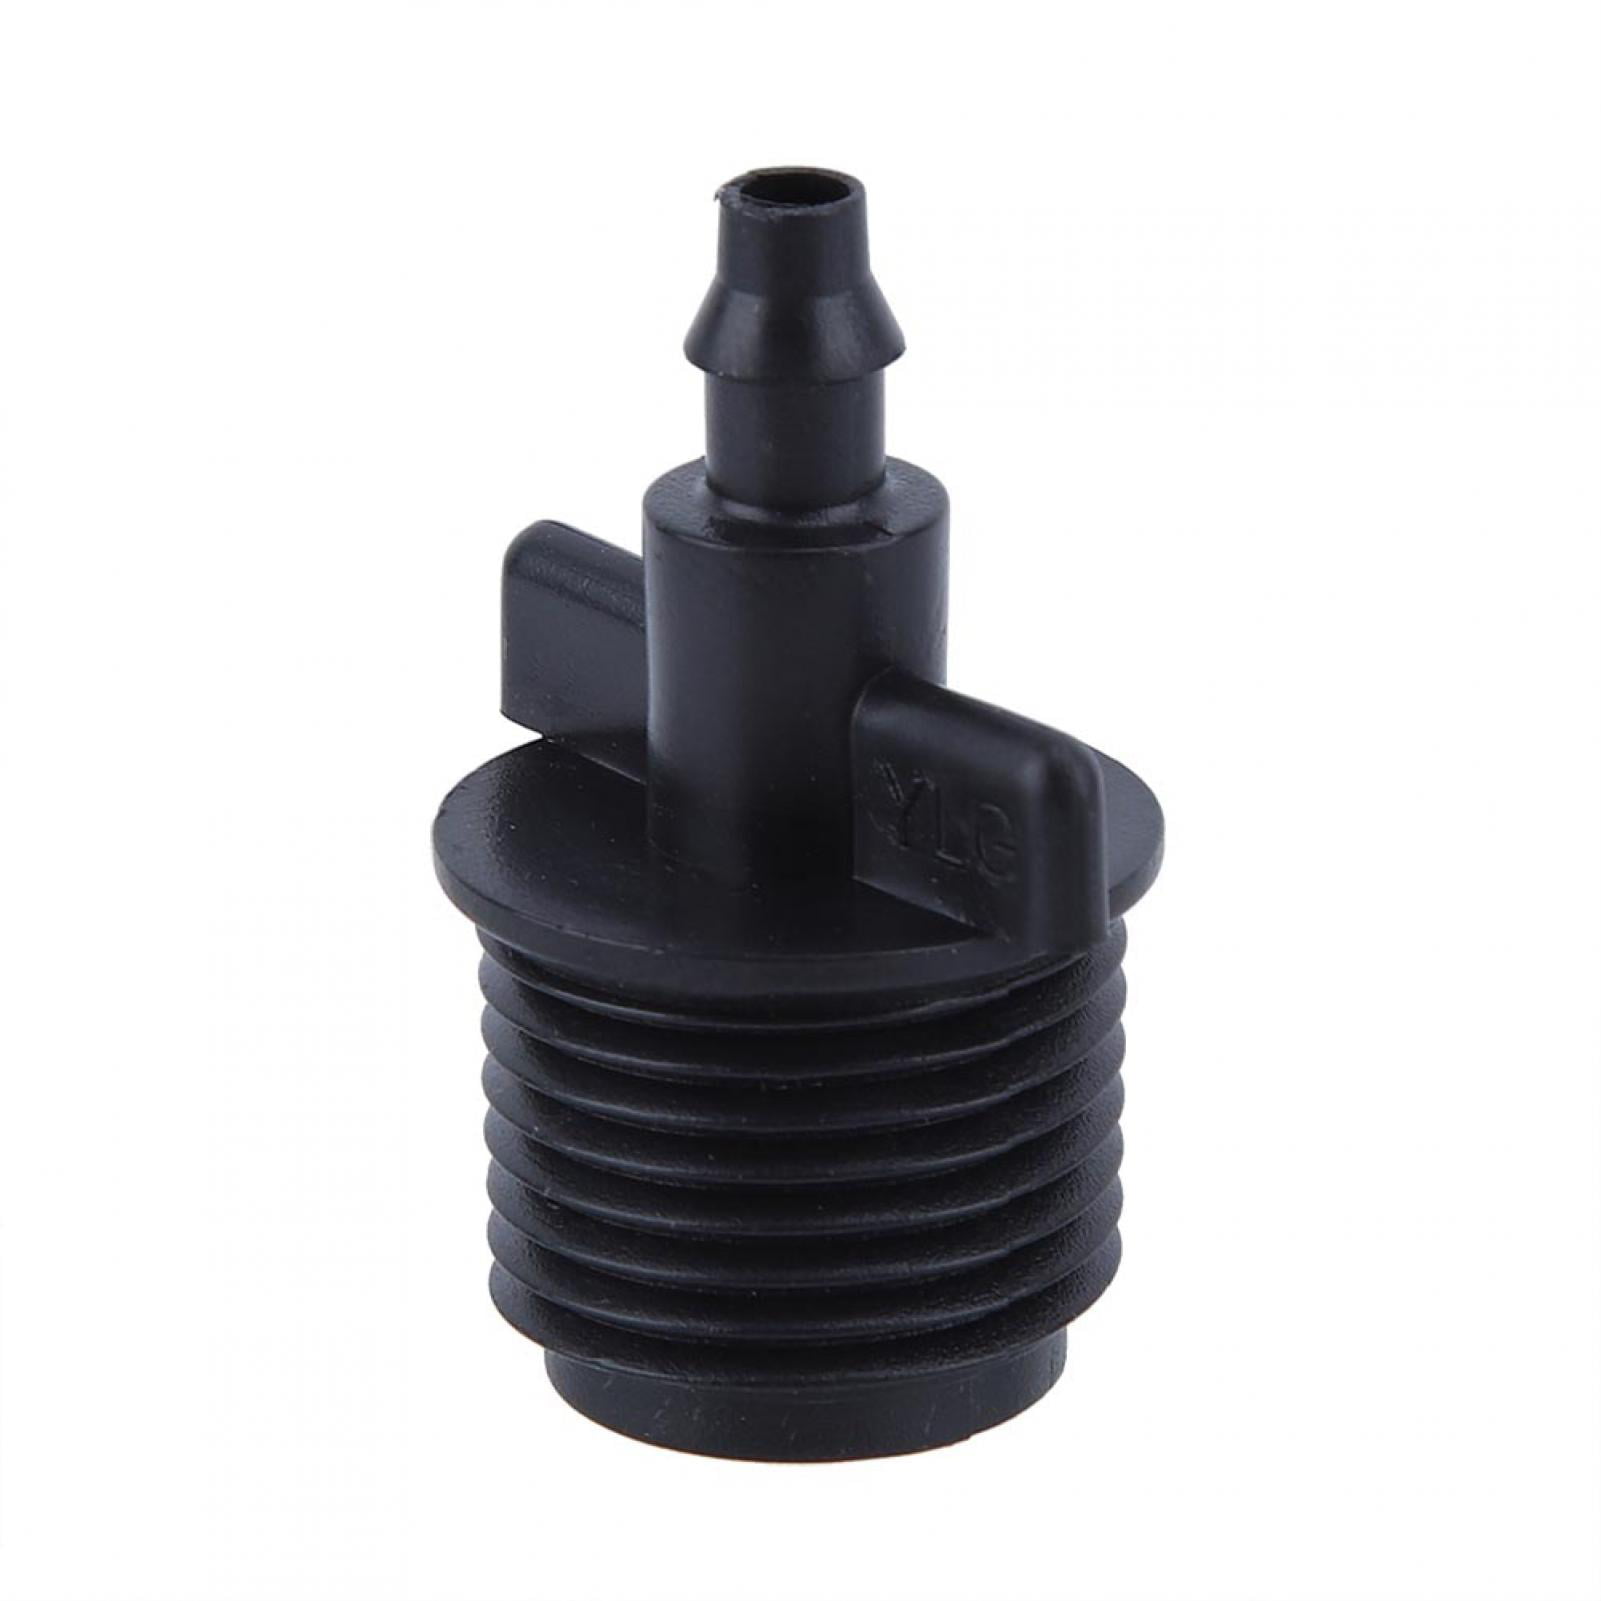 Details about   Tubing Adapter Plastic 1/2\ Tubing Adapter 1.3cm/0.51in Capillary Tubing Hose 